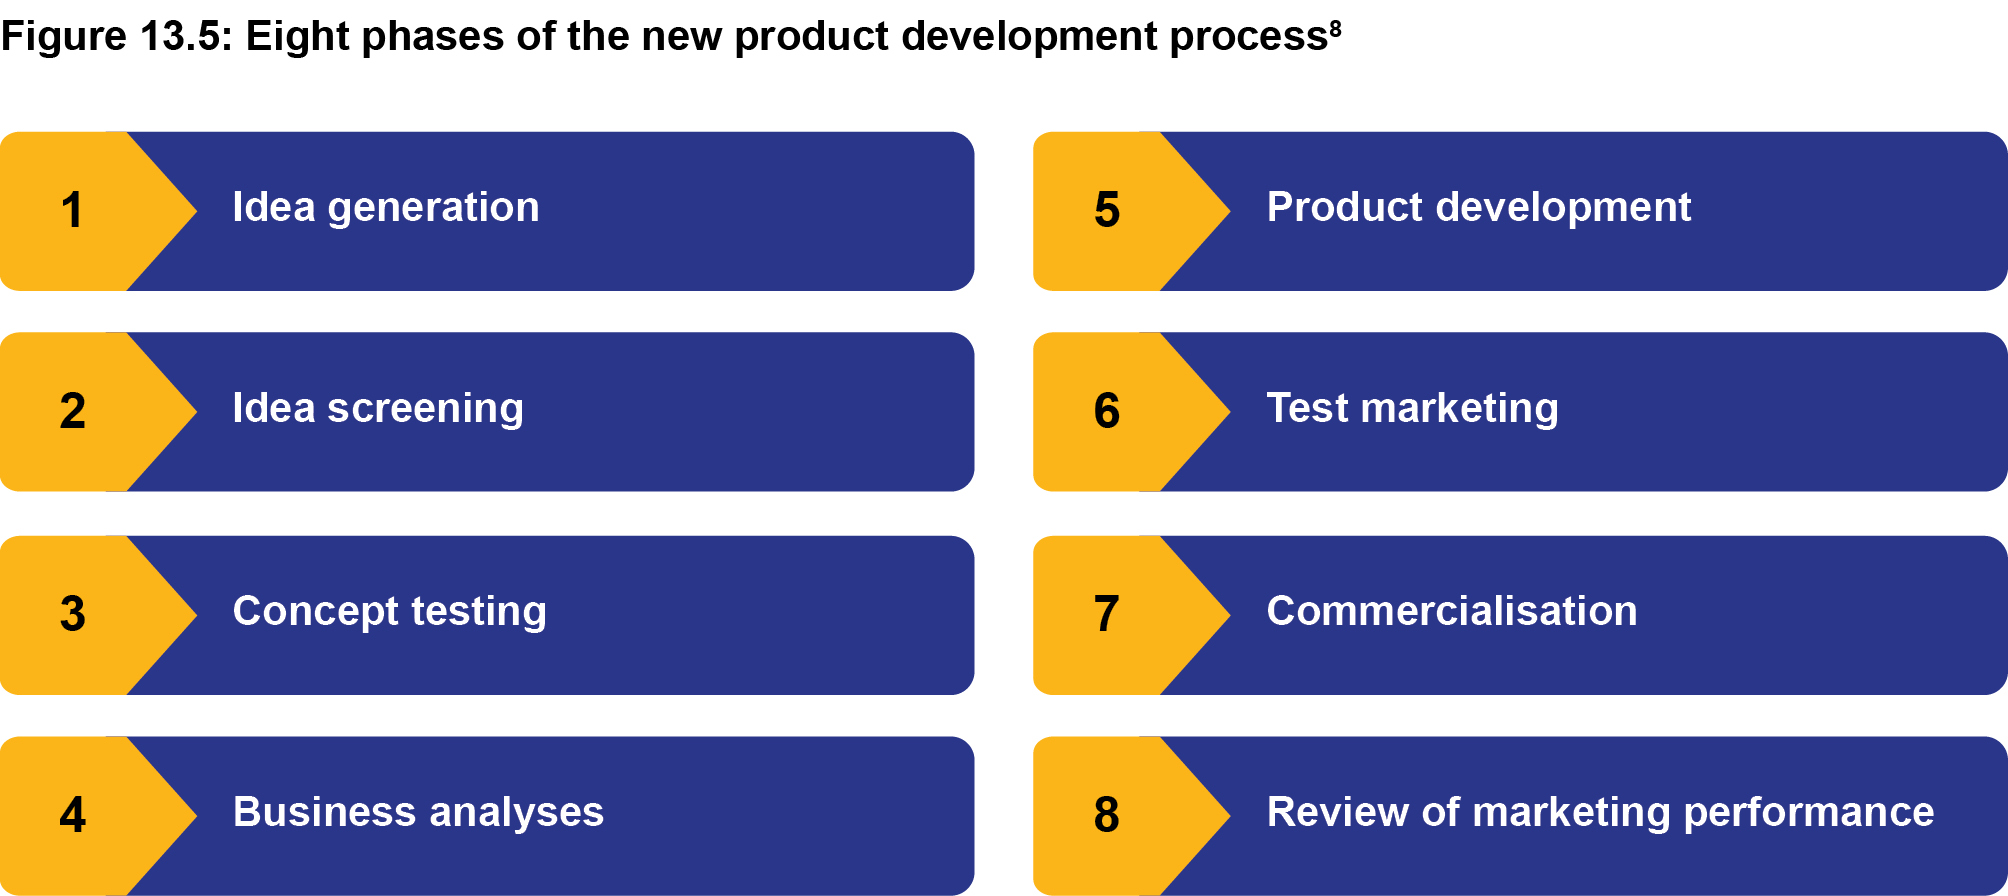 Figure 13.5: Eight phases of the new product development process